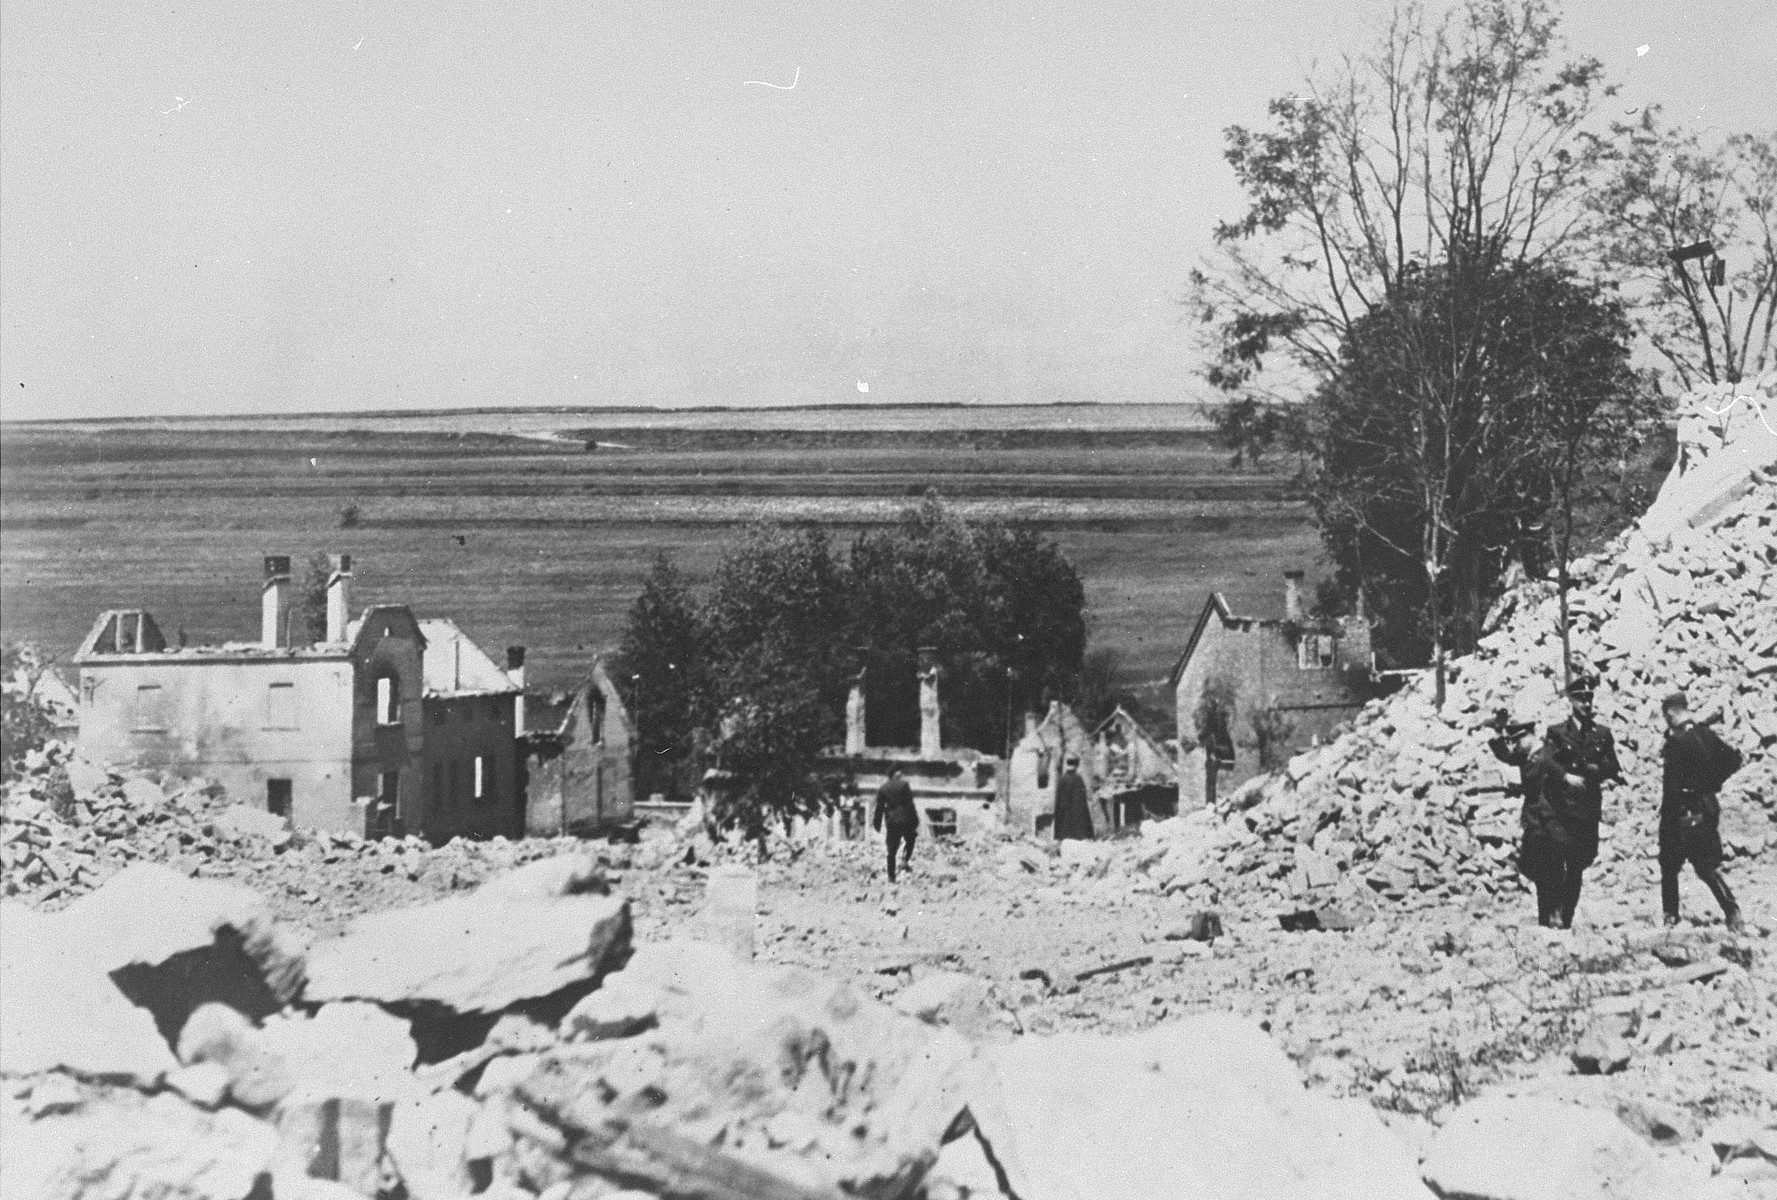 SS officers stand among the rubble of Lidice during the demolition of the town's ruins.